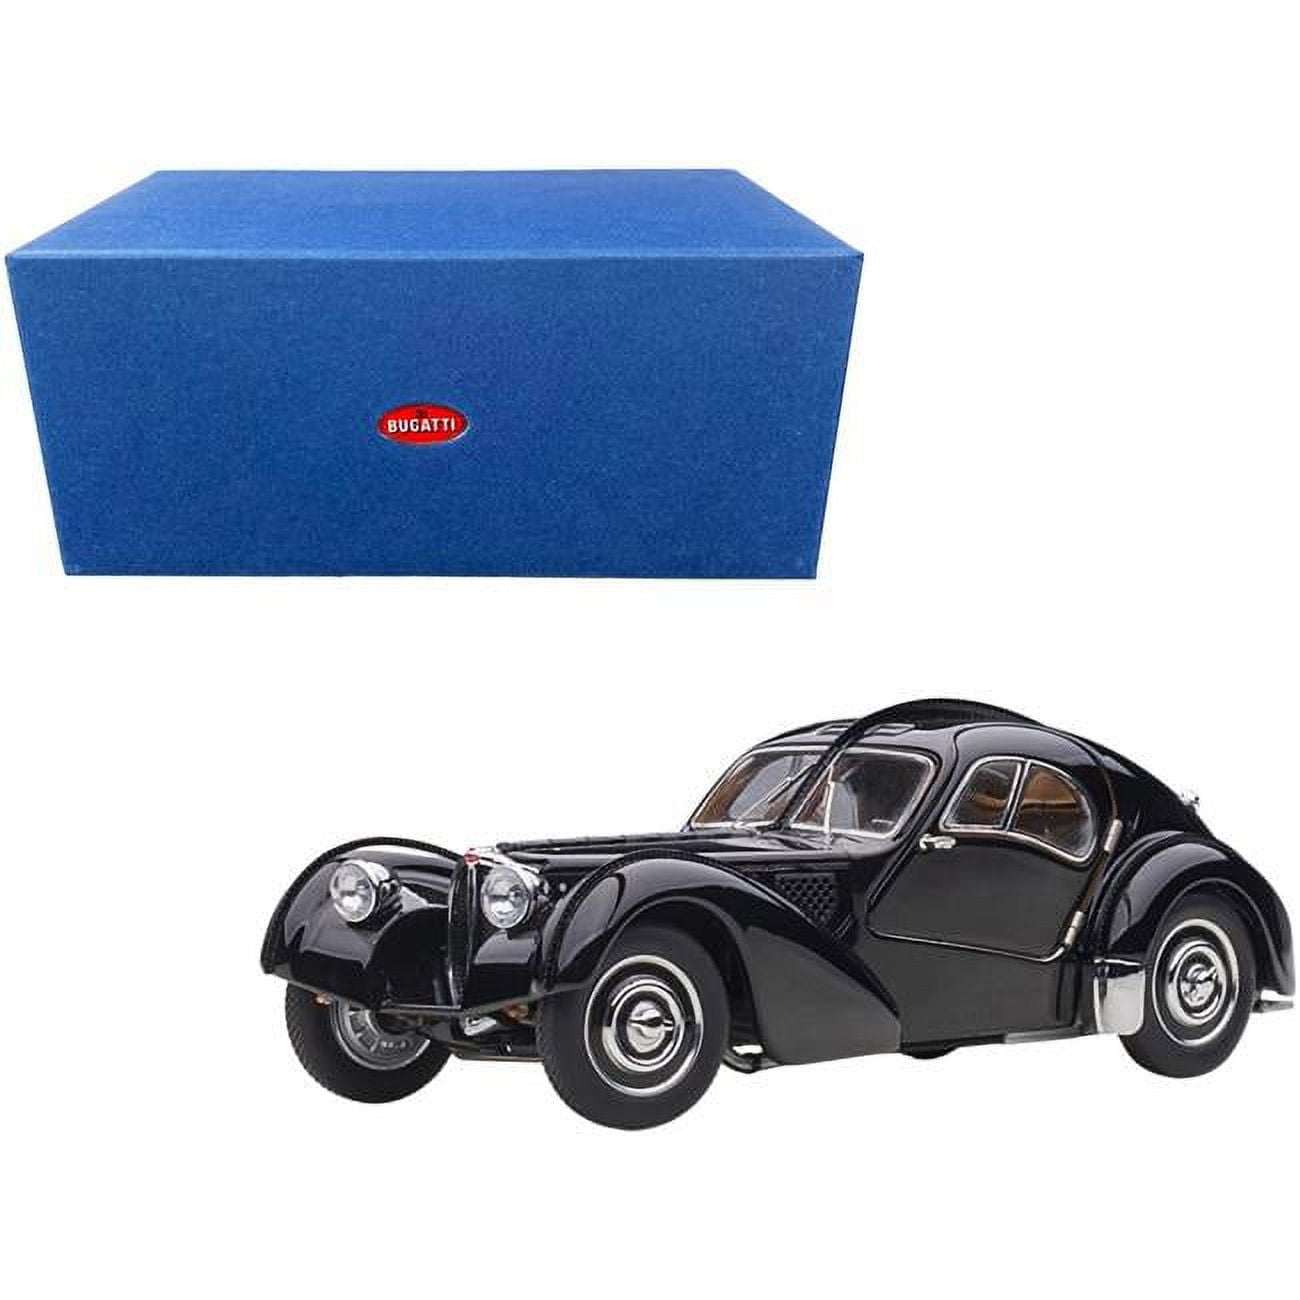 Picture of Autoart 50946 Atlantic with Disc Wheels Black 1 by 43 Scale Diecast Model Car for 1938 Bugatti Type 57SC